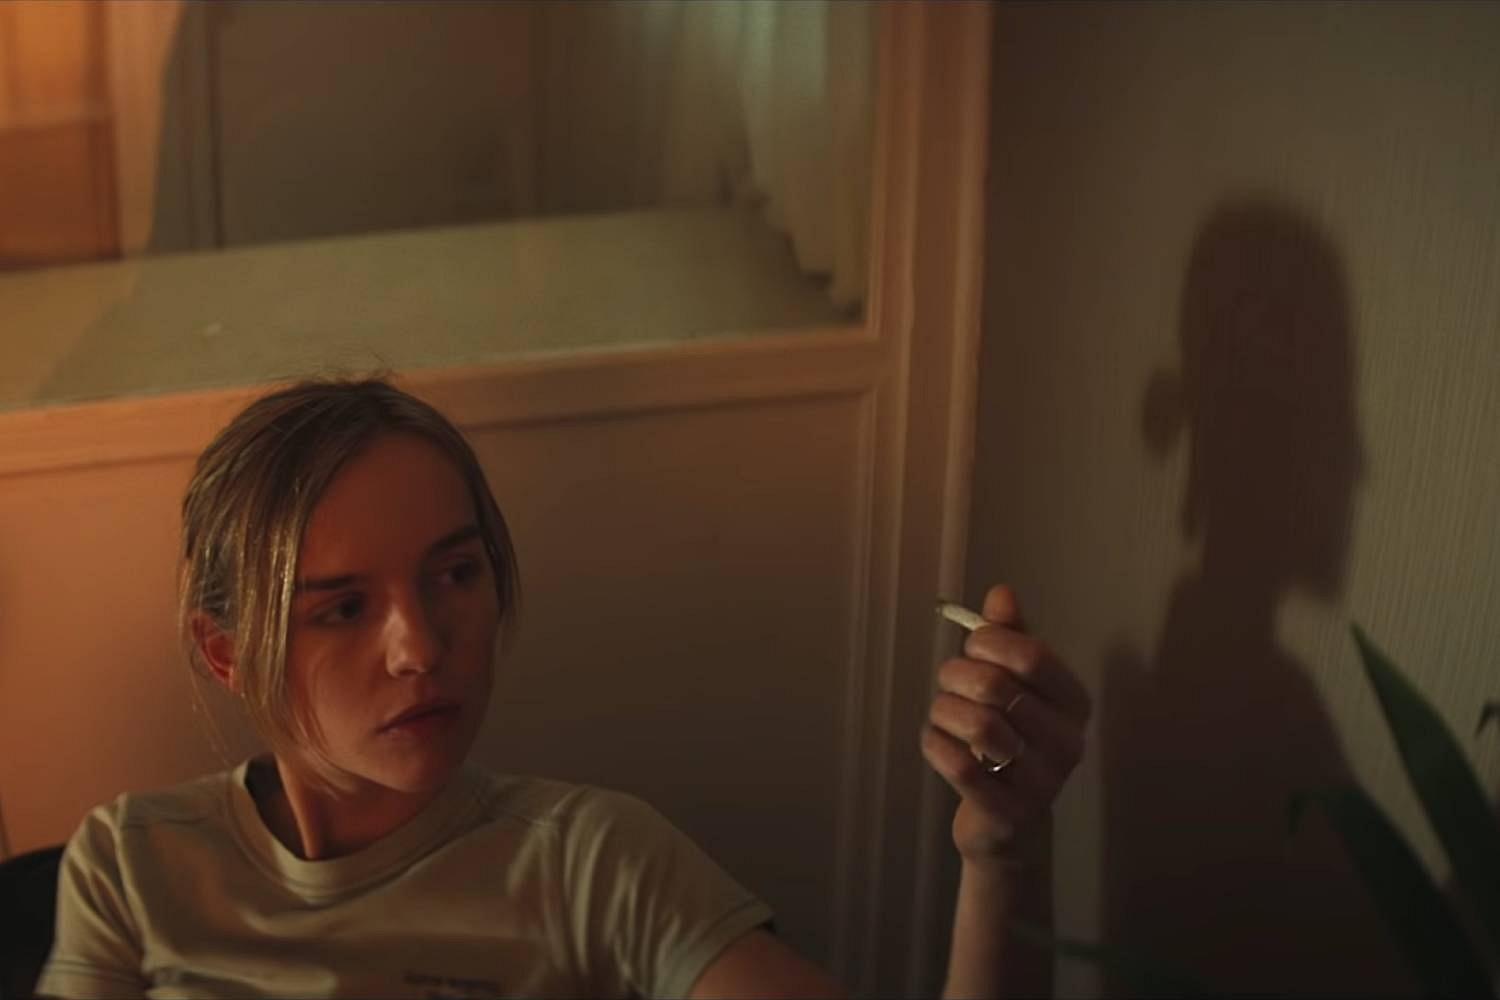 The Japanese House shares new video for 'Maybe You're The Reason'